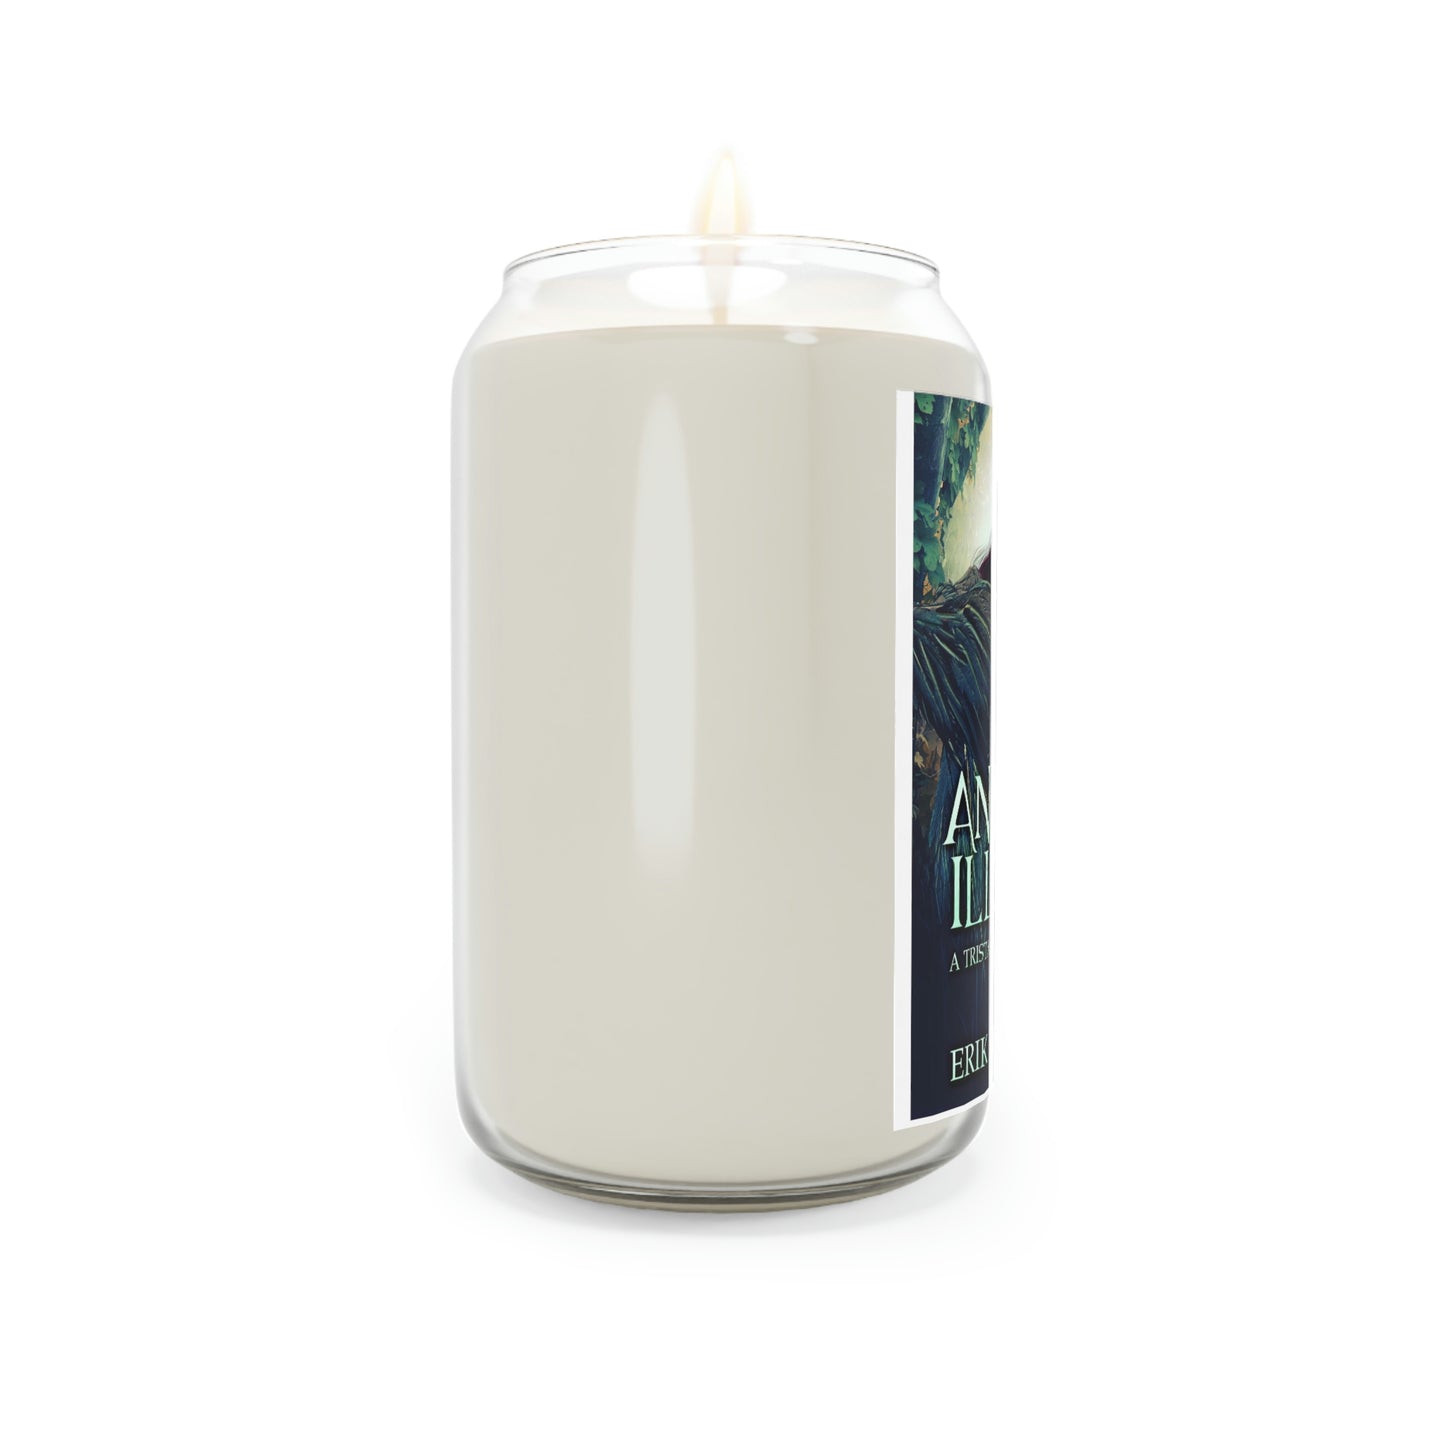 Antidote Illusions - Scented Candle